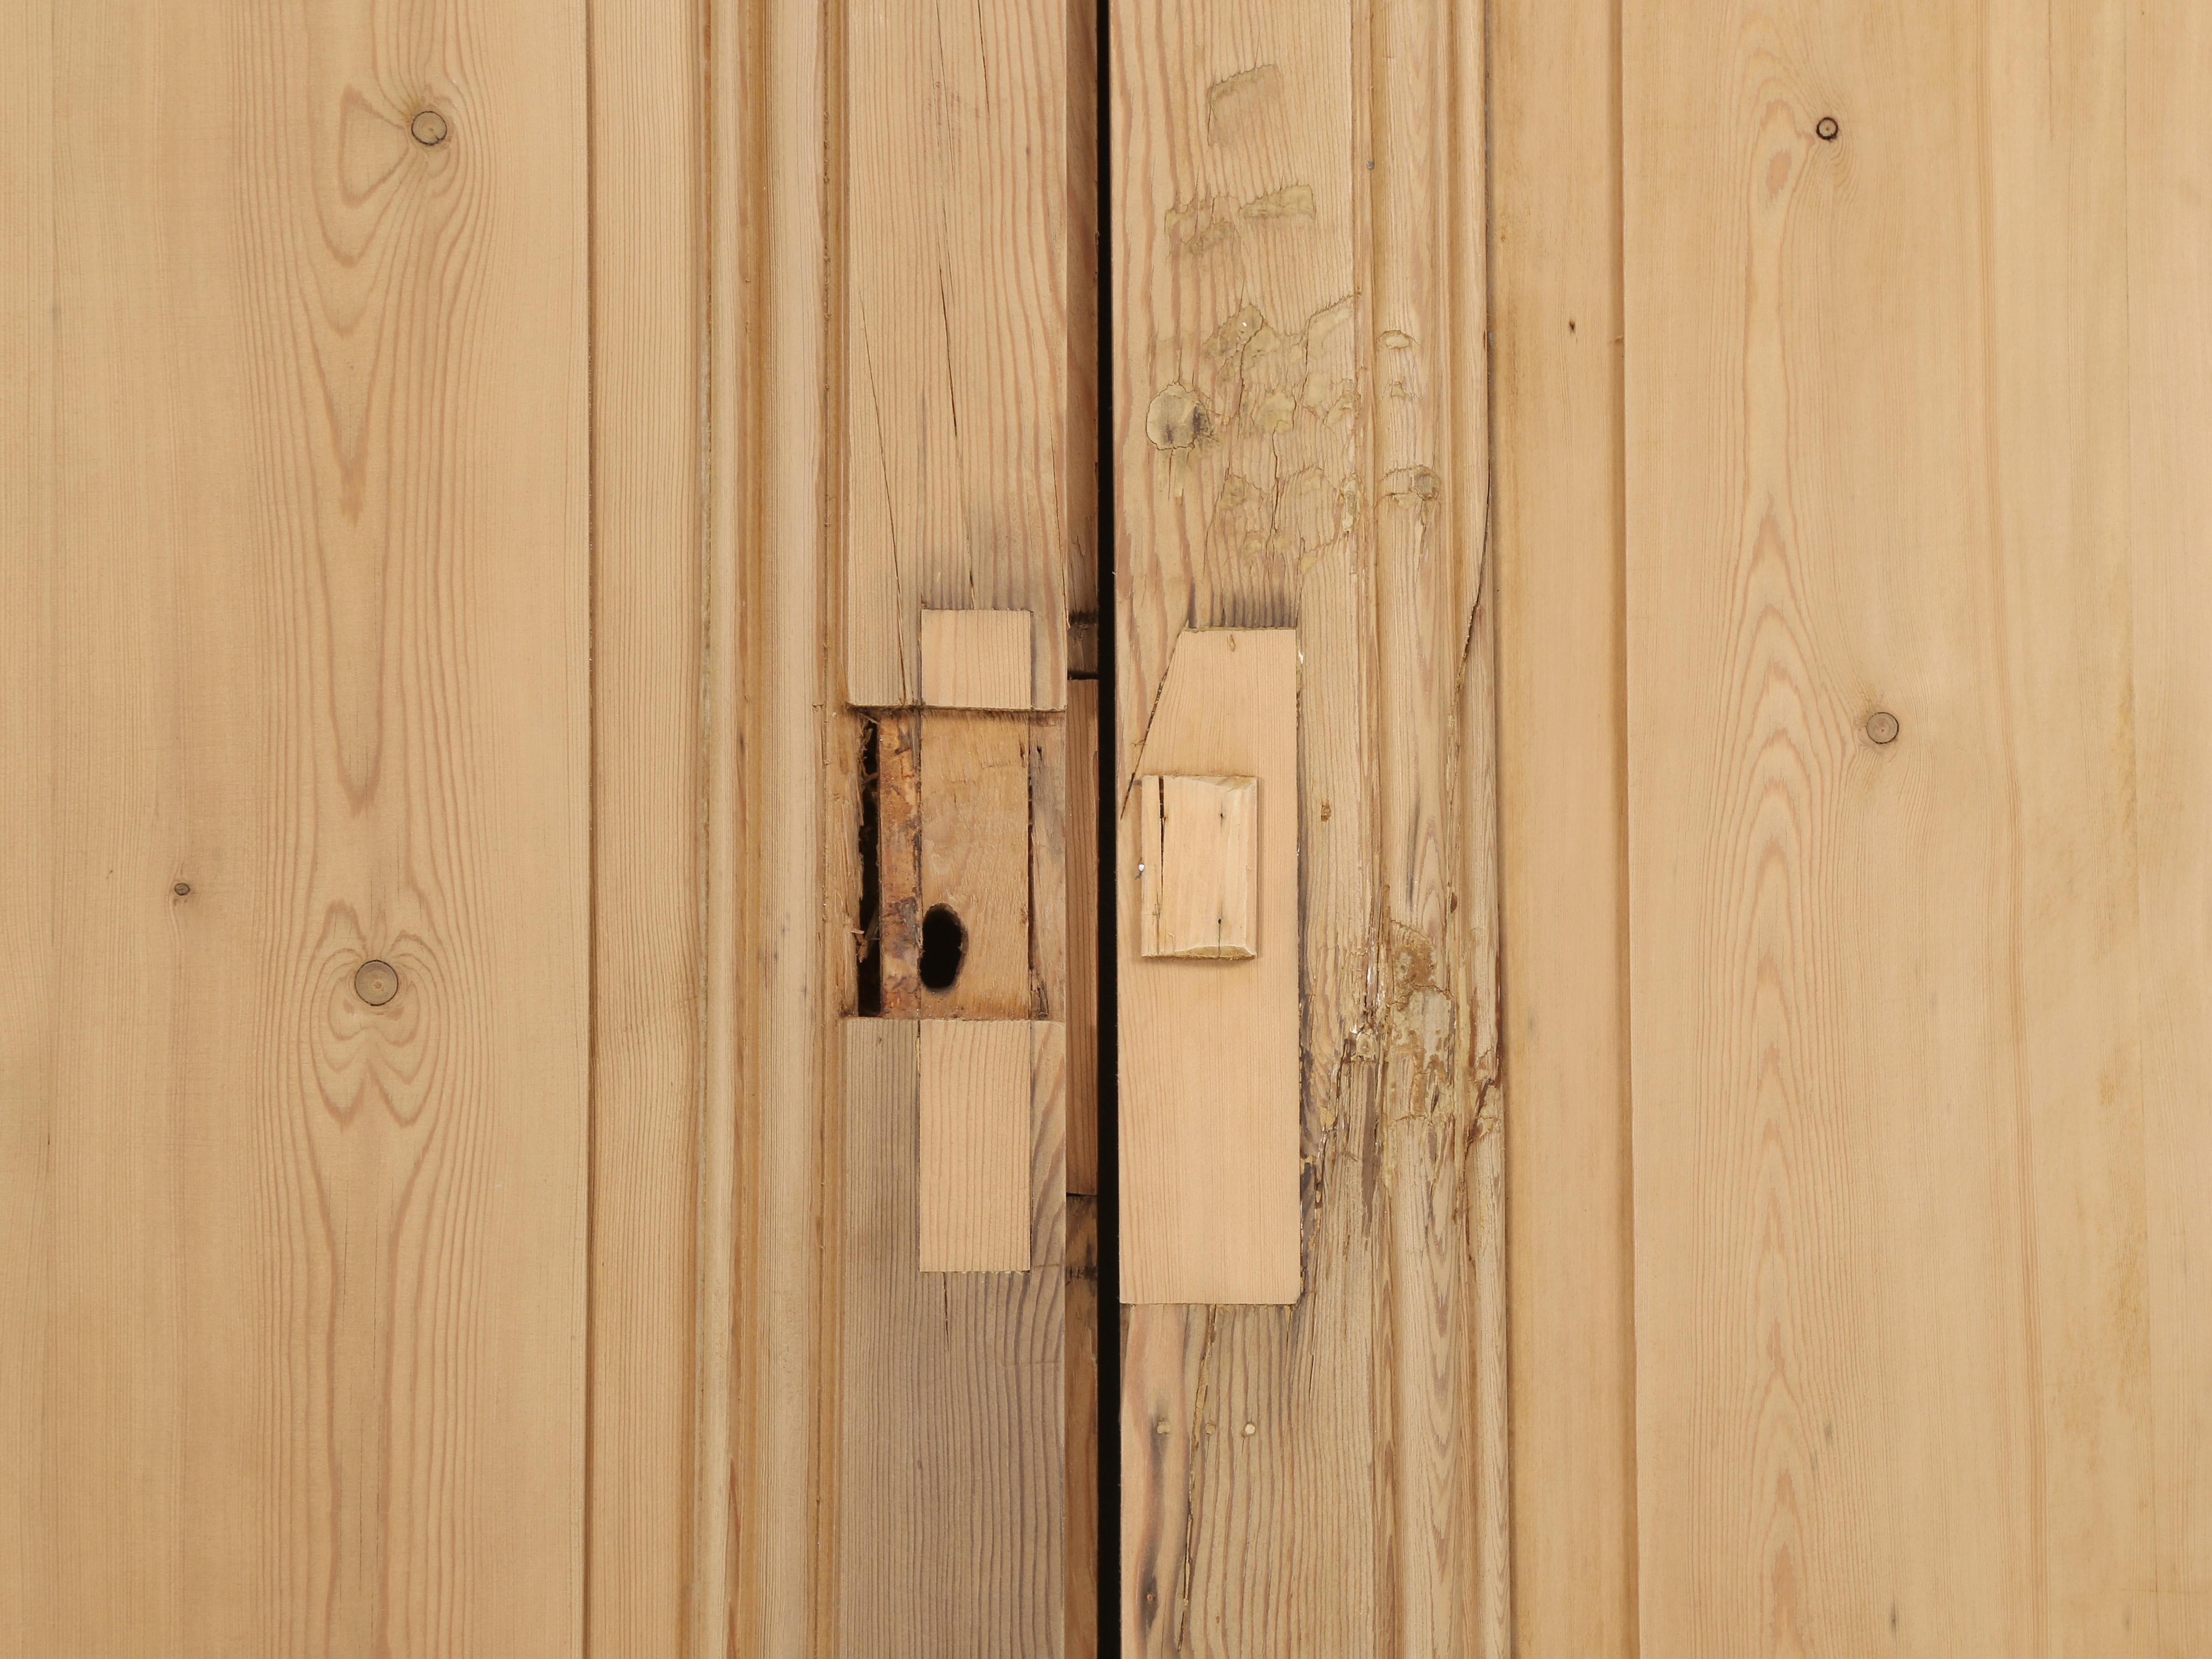 Antique '2' Pairs of French Doors From Toulouse Region Stripped to Raw Wood 9